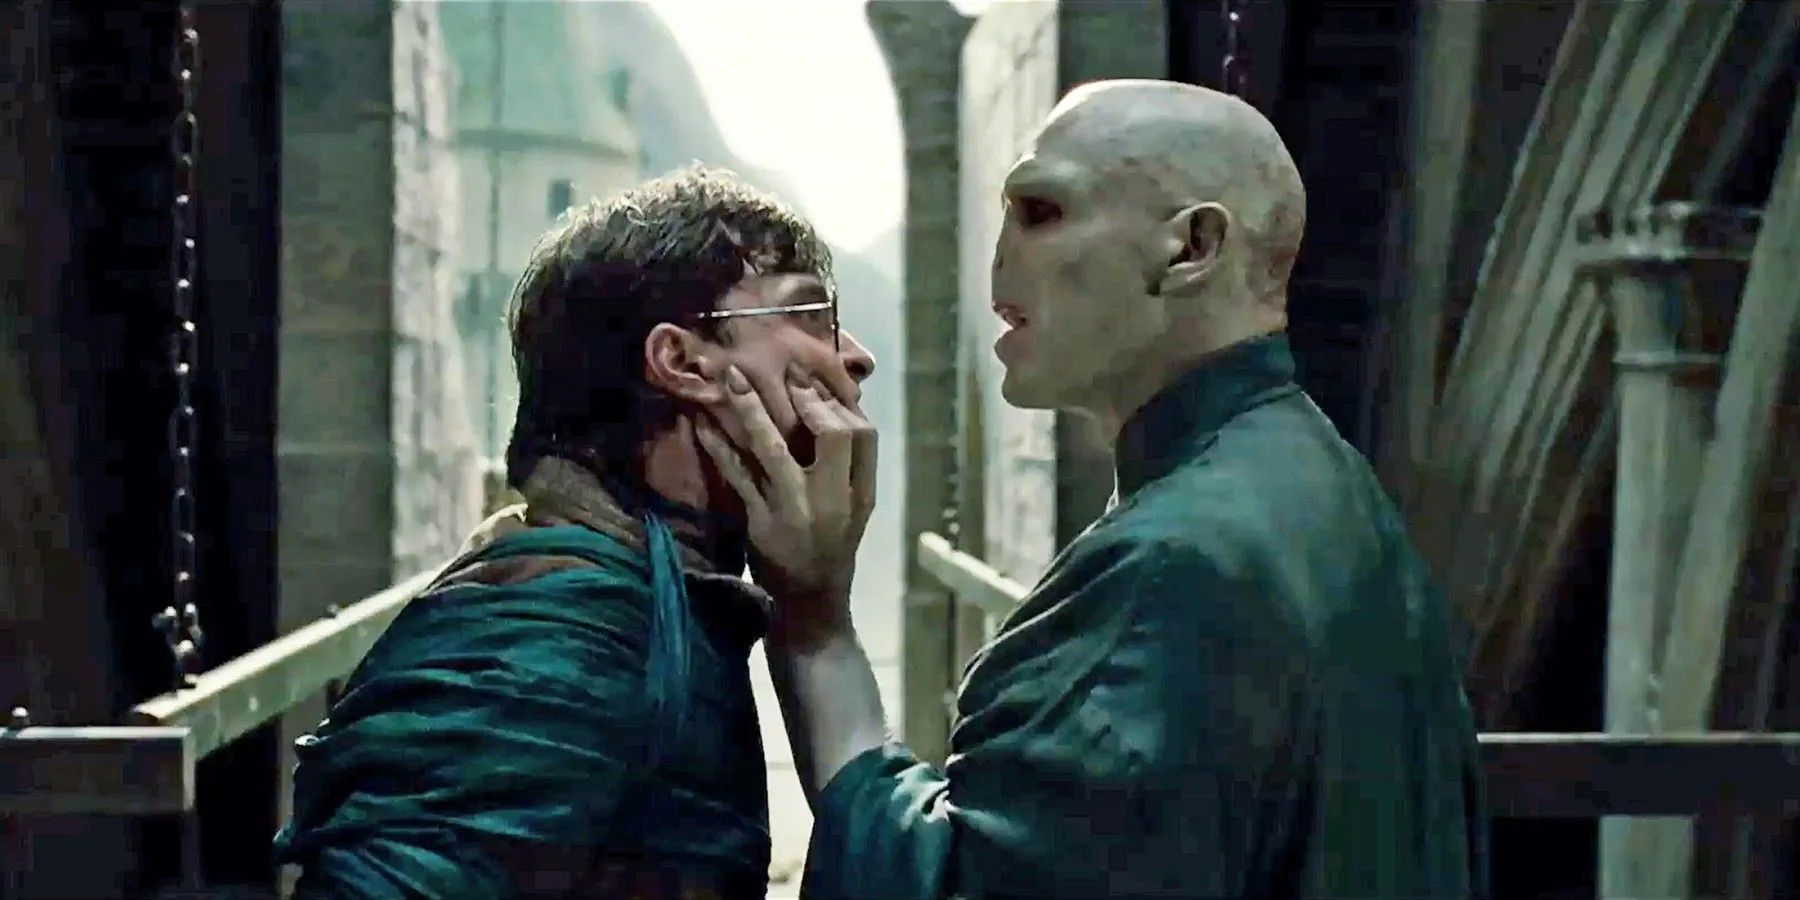 Ralph Fiennes as Voldemort grabs Harry Potter's (Daniel Radcliffe) face in Harry Potter and the Deathly Hallows - Part 2 